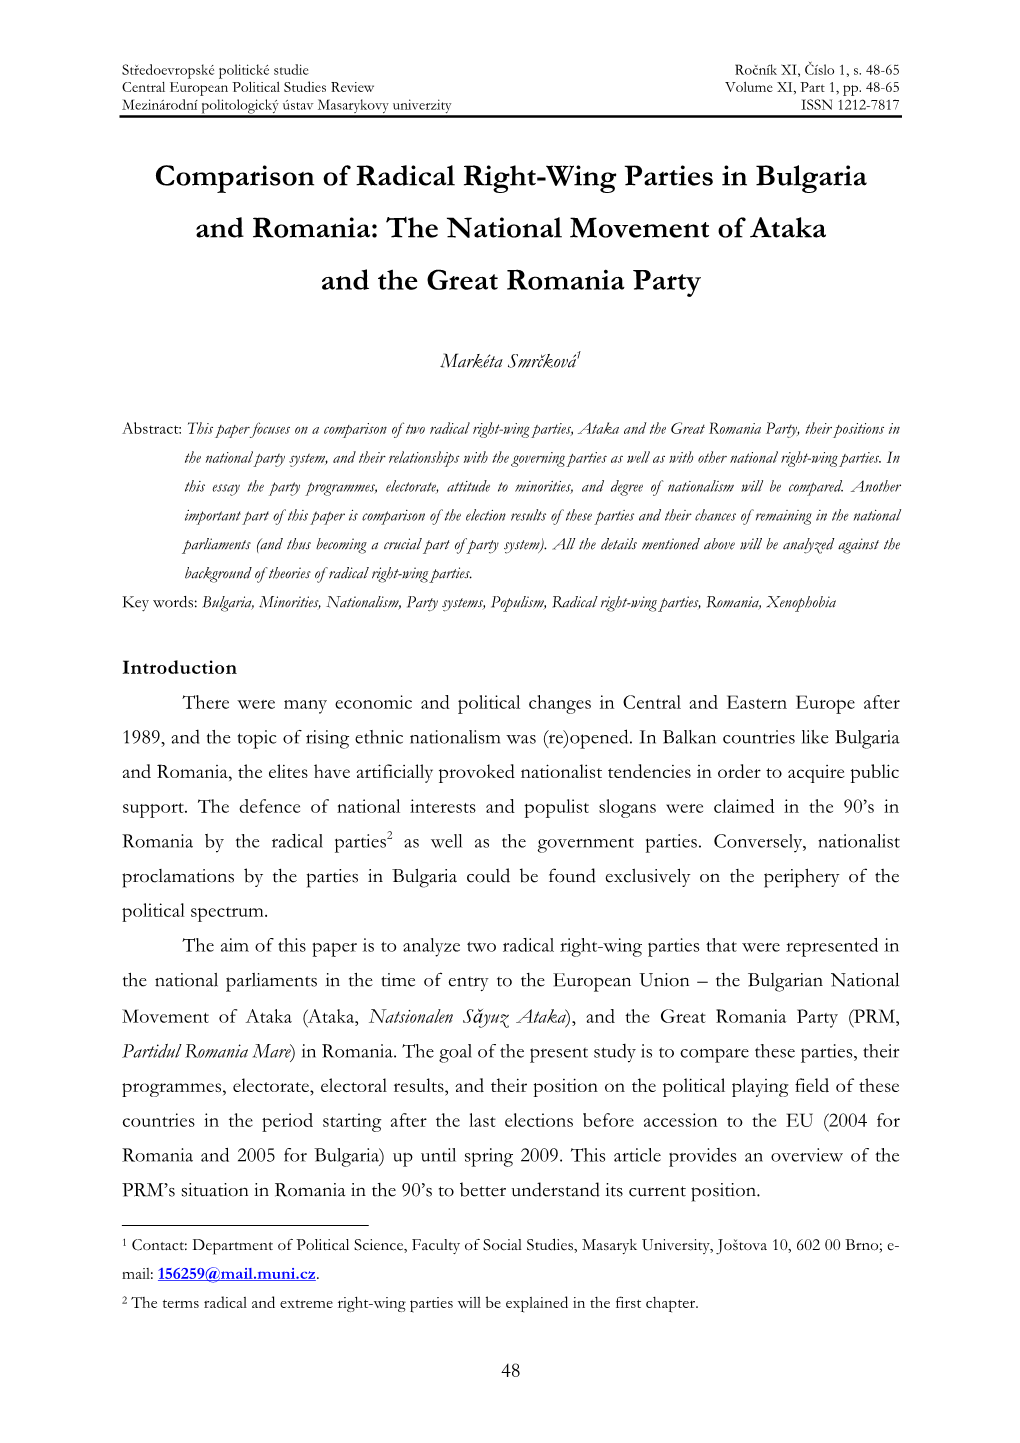 Comparison of Radical Right-Wing Parties in Bulgaria and Romania: the National Movement of Ataka and the Great Romania Party